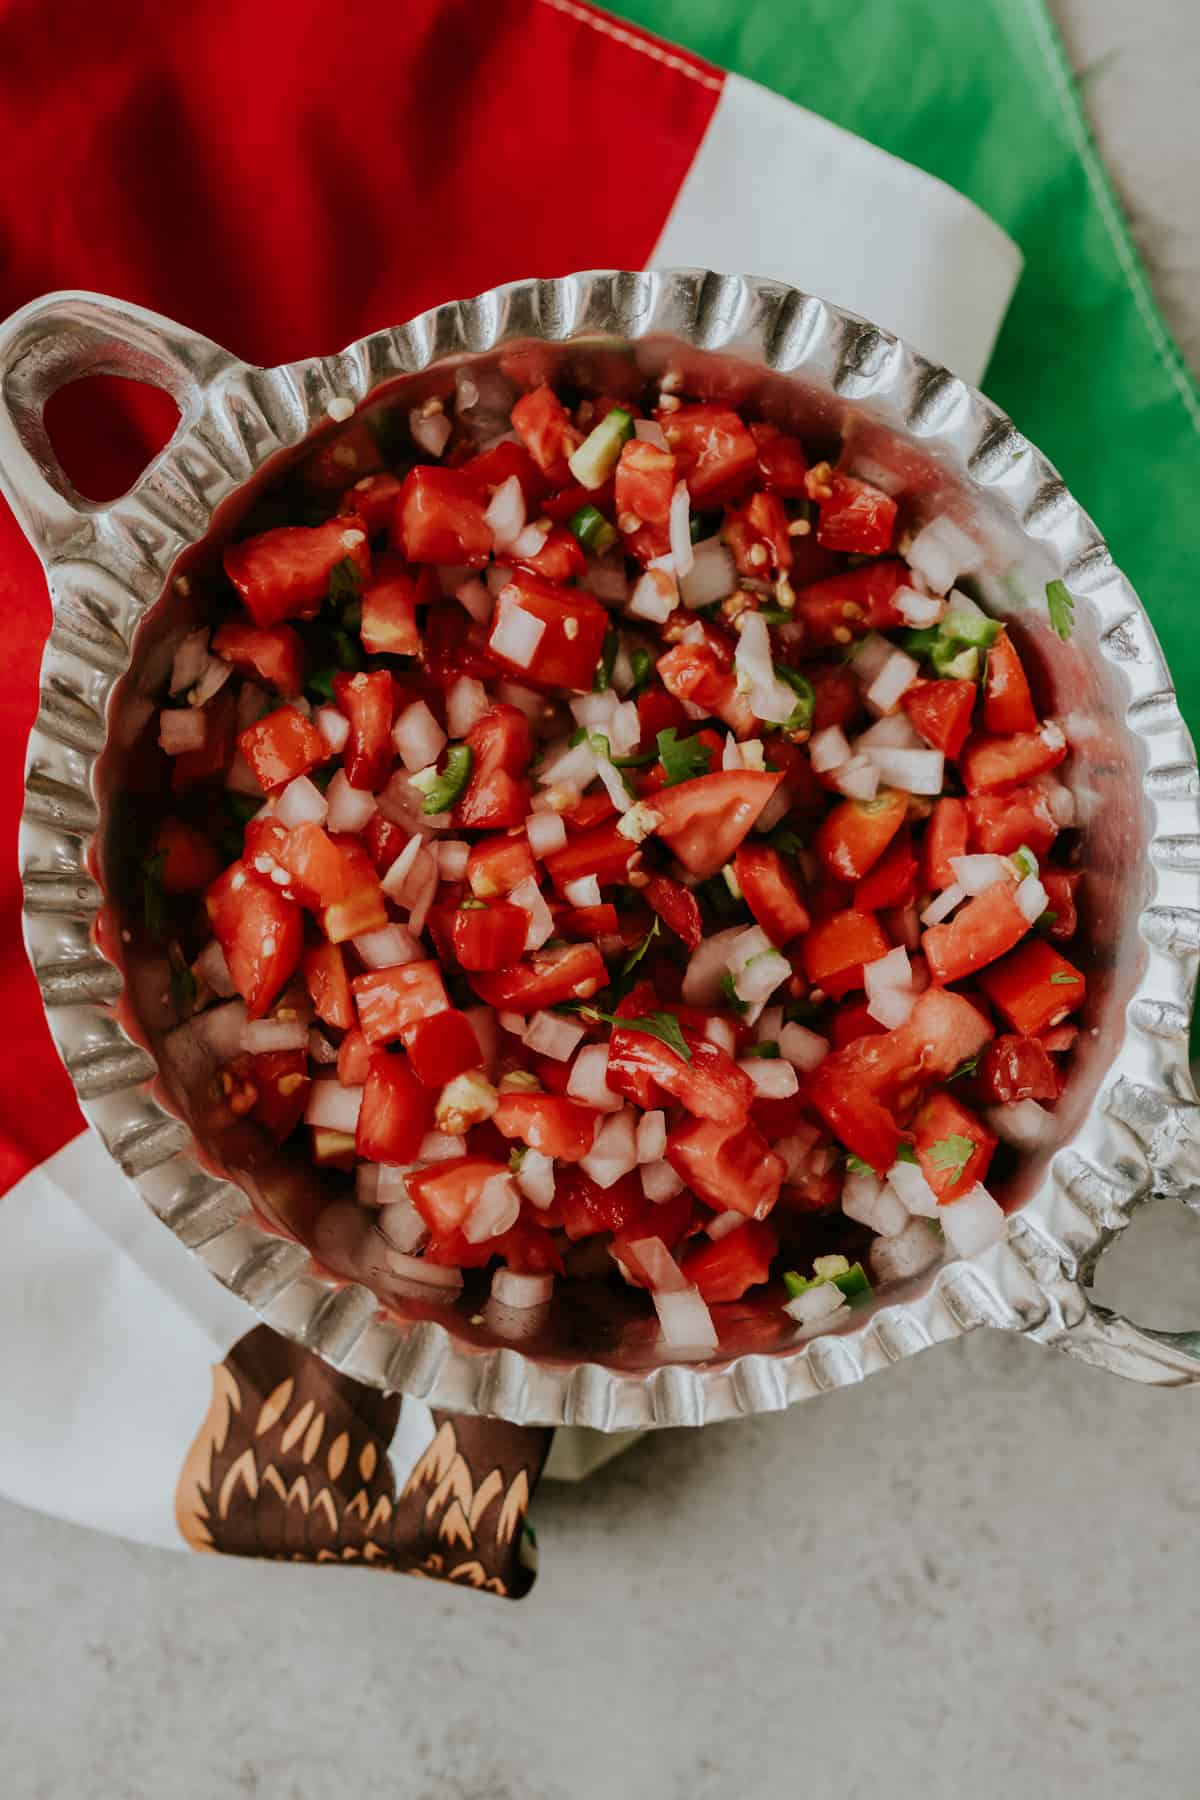 Freshly chopped Pico de Gallo salsa in a silver bowl with a red, white, and green Mexican flag underneath